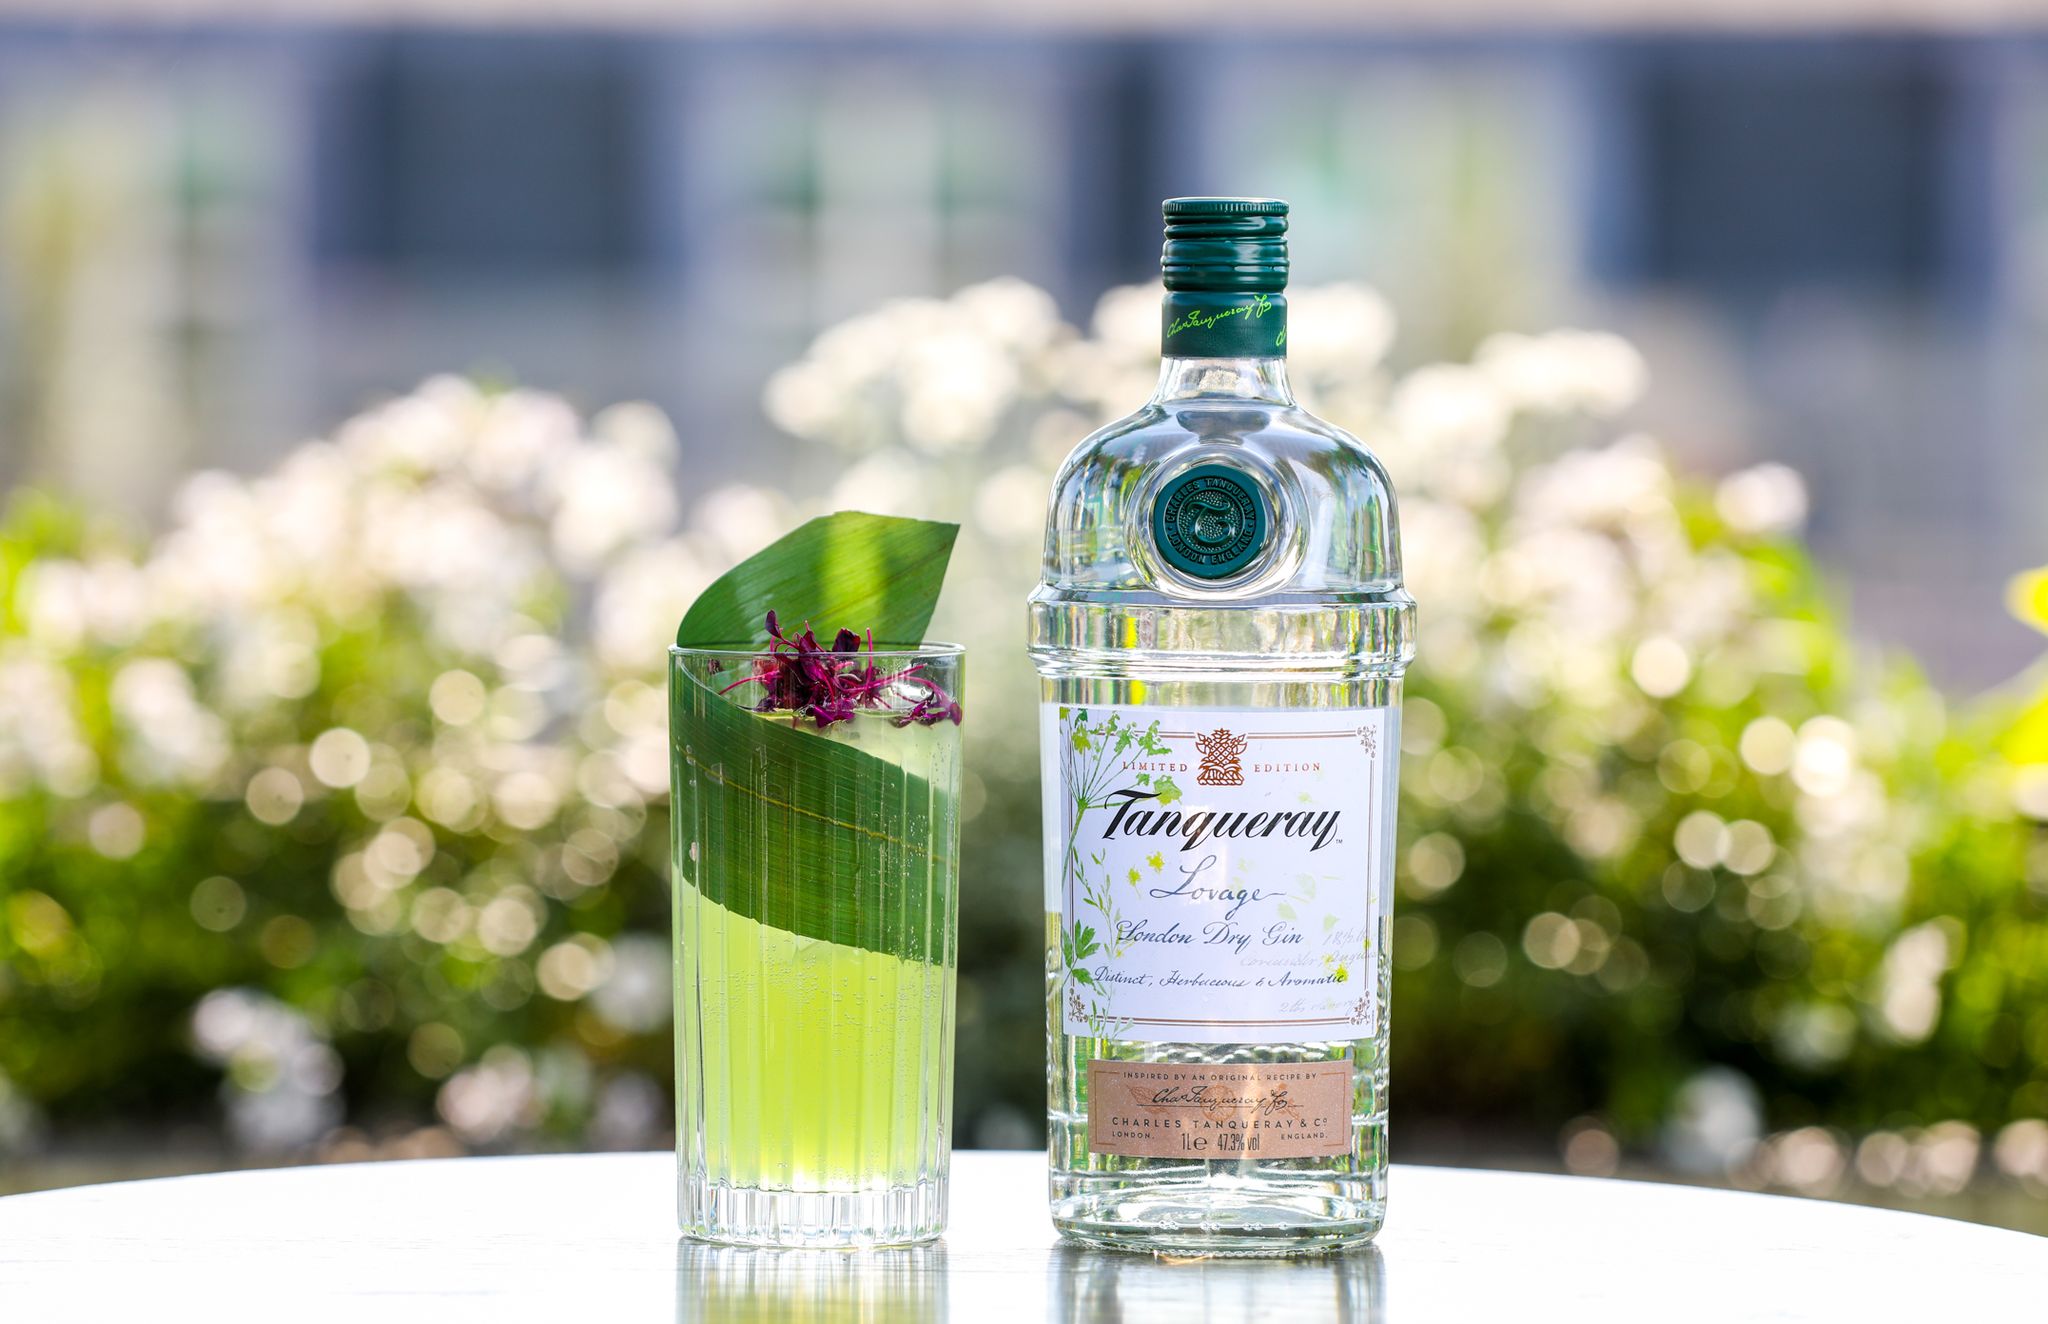 Tanqueray gin lovage